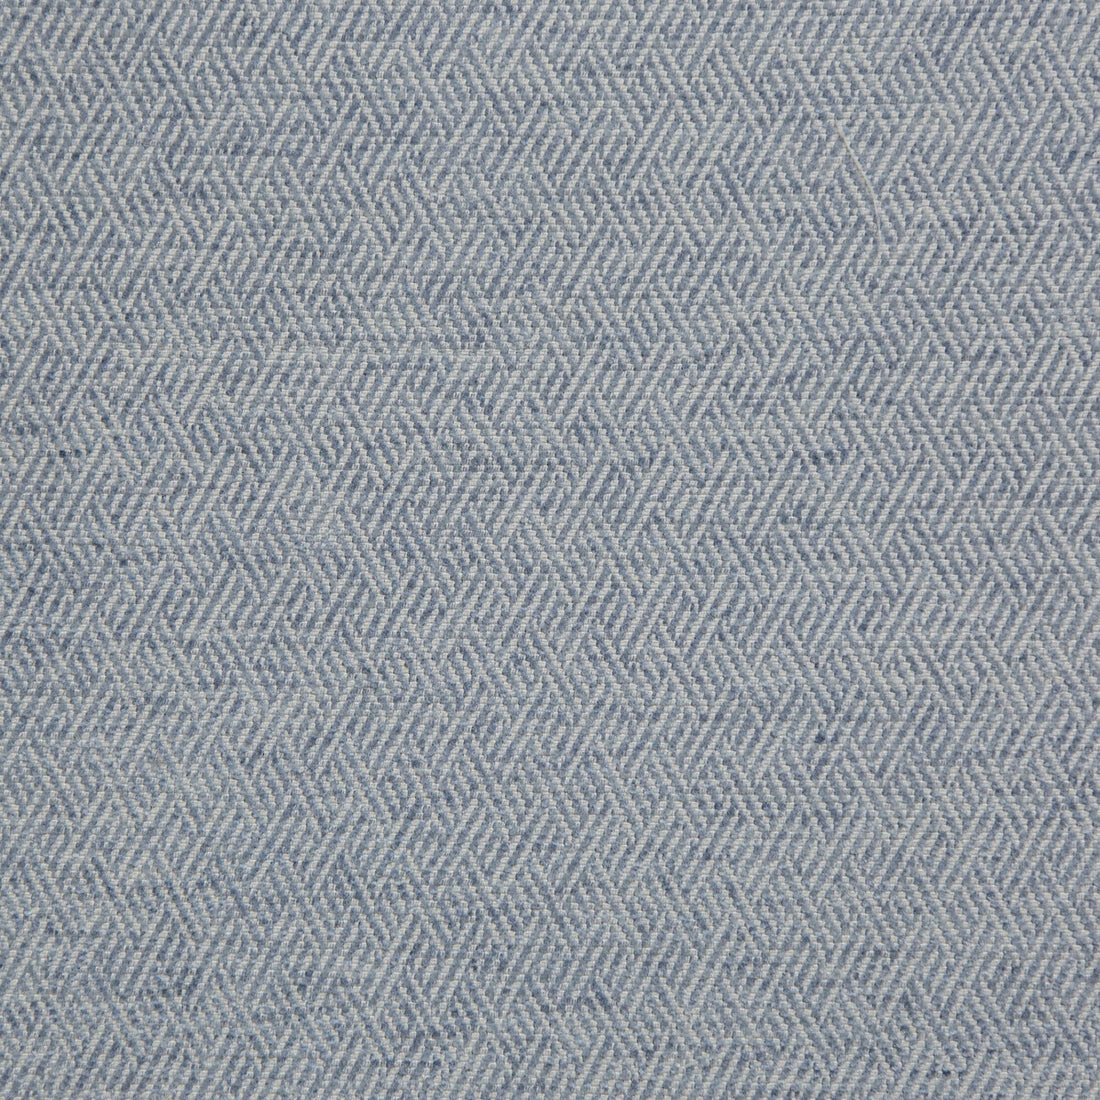 Basslet fabric in chambray color - pattern 35822.15.0 - by Kravet Design in the Indoor / Outdoor collection